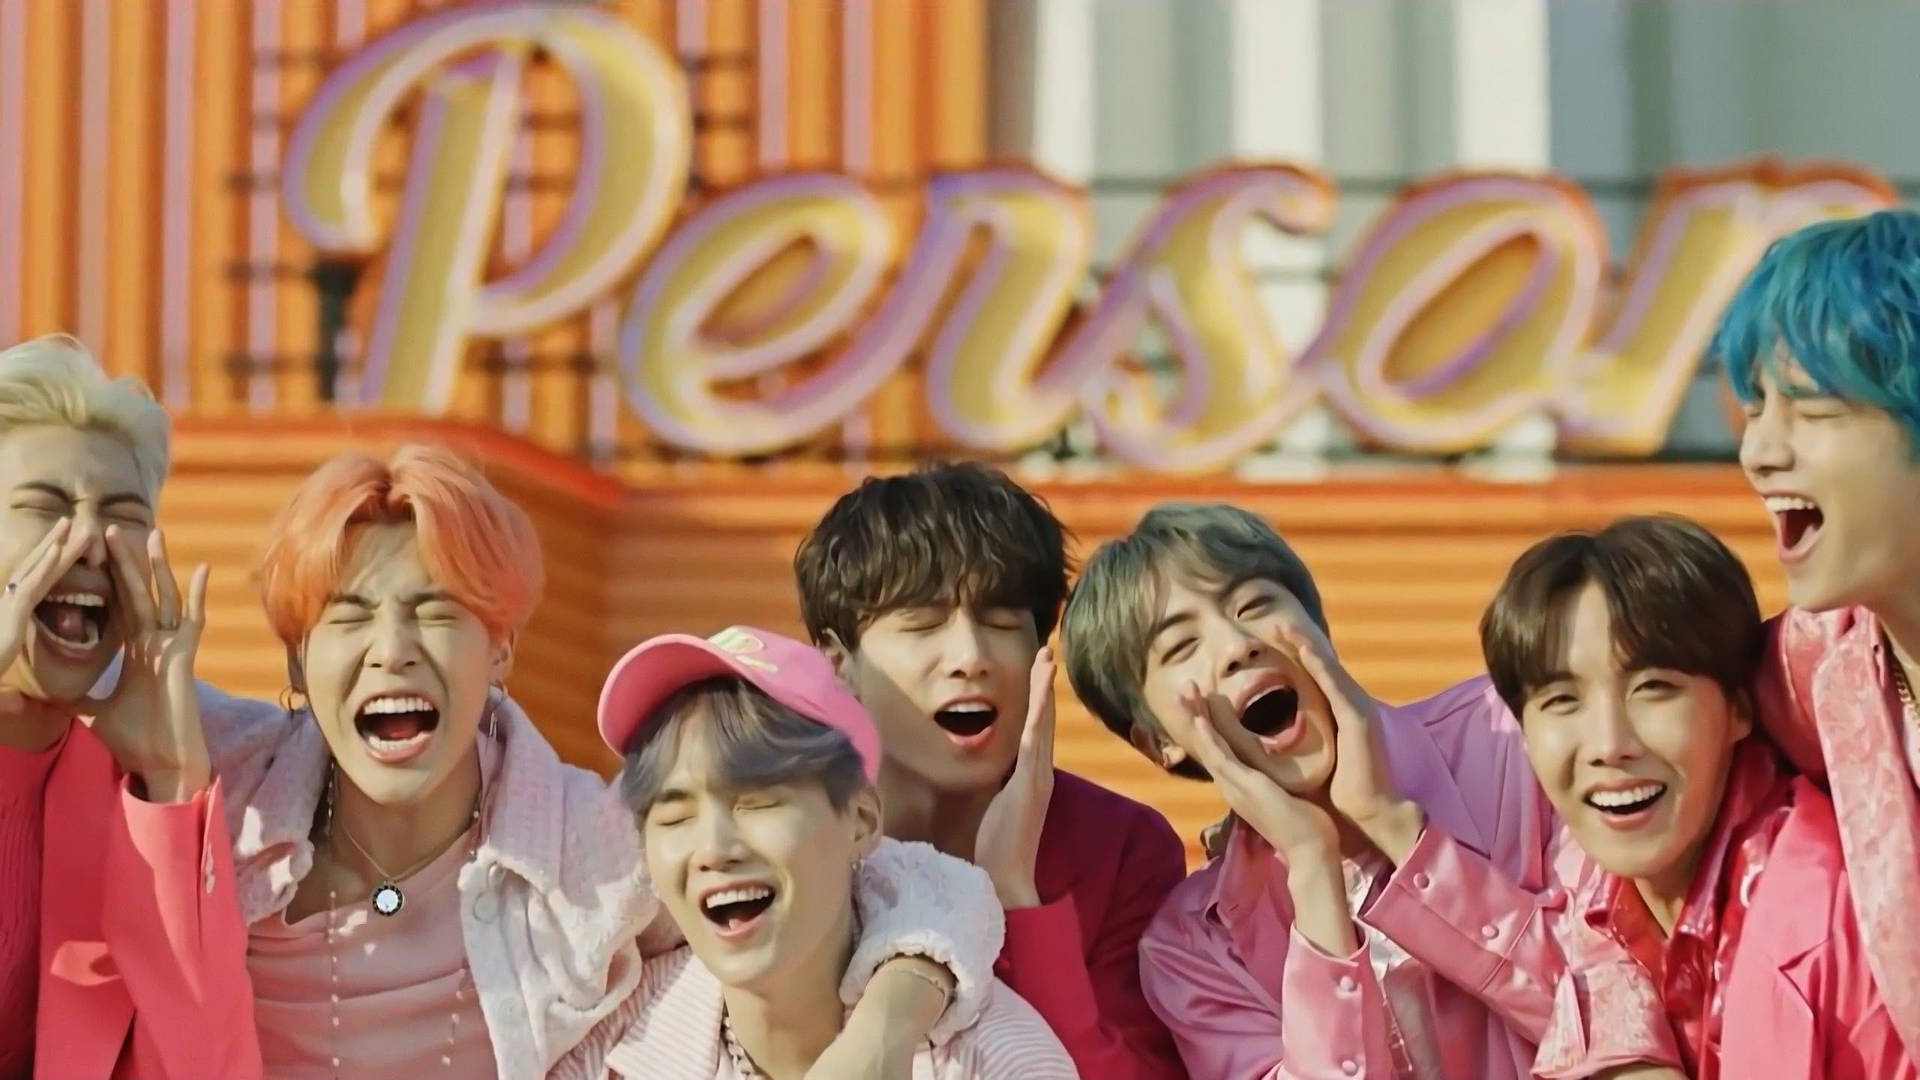 Bts 2021 Boy With Luv Wallpaper